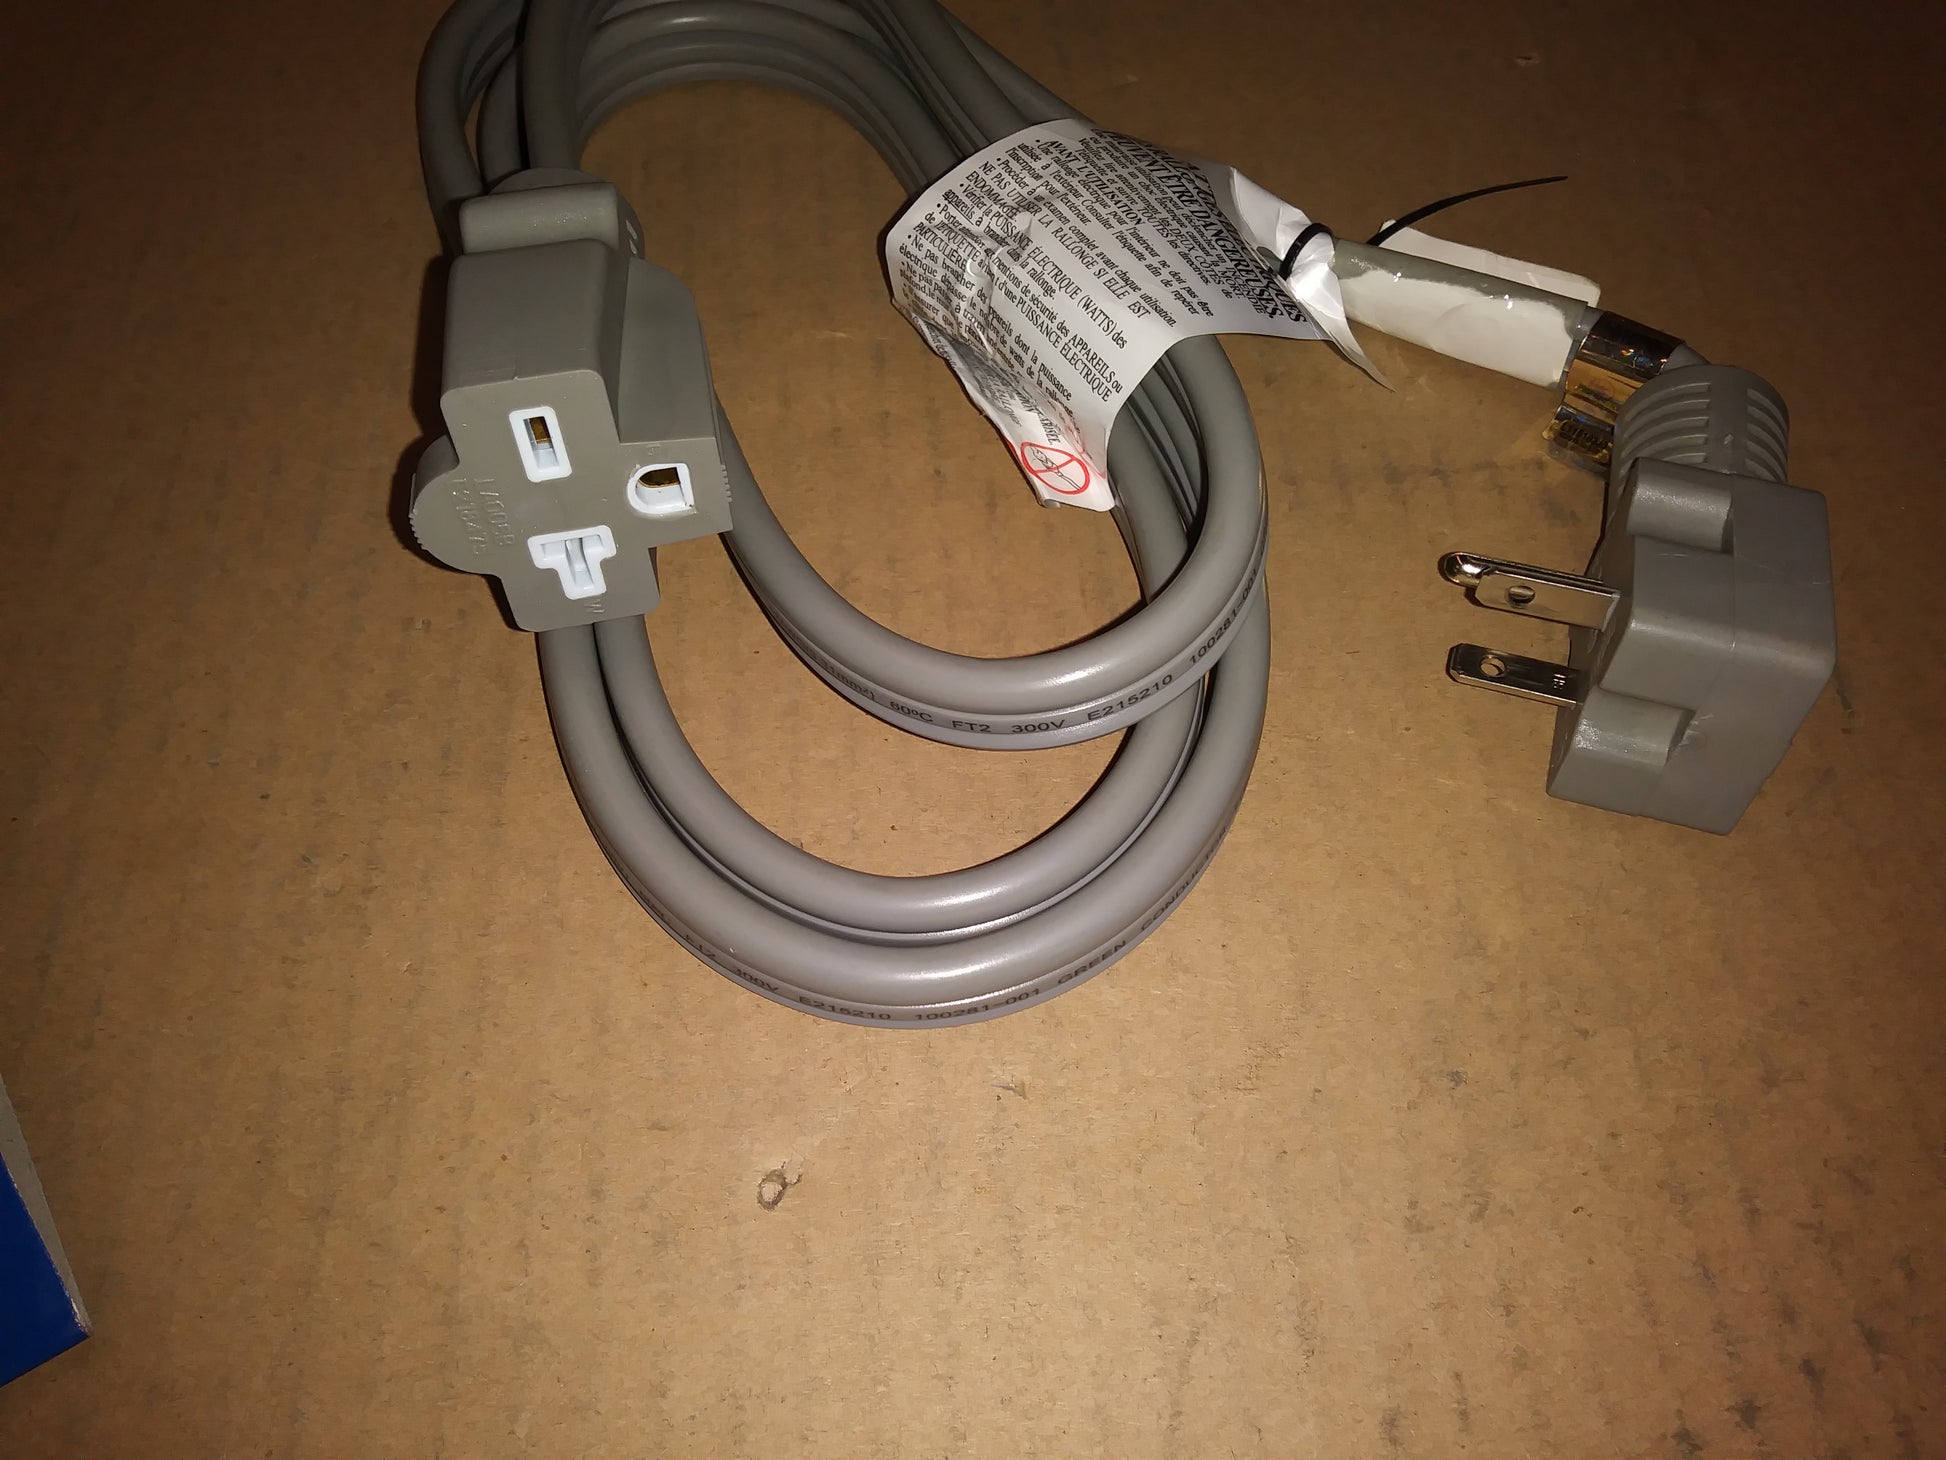 6FT. APPLIANCE EXTENSION CORD, 20AMPS, 250V